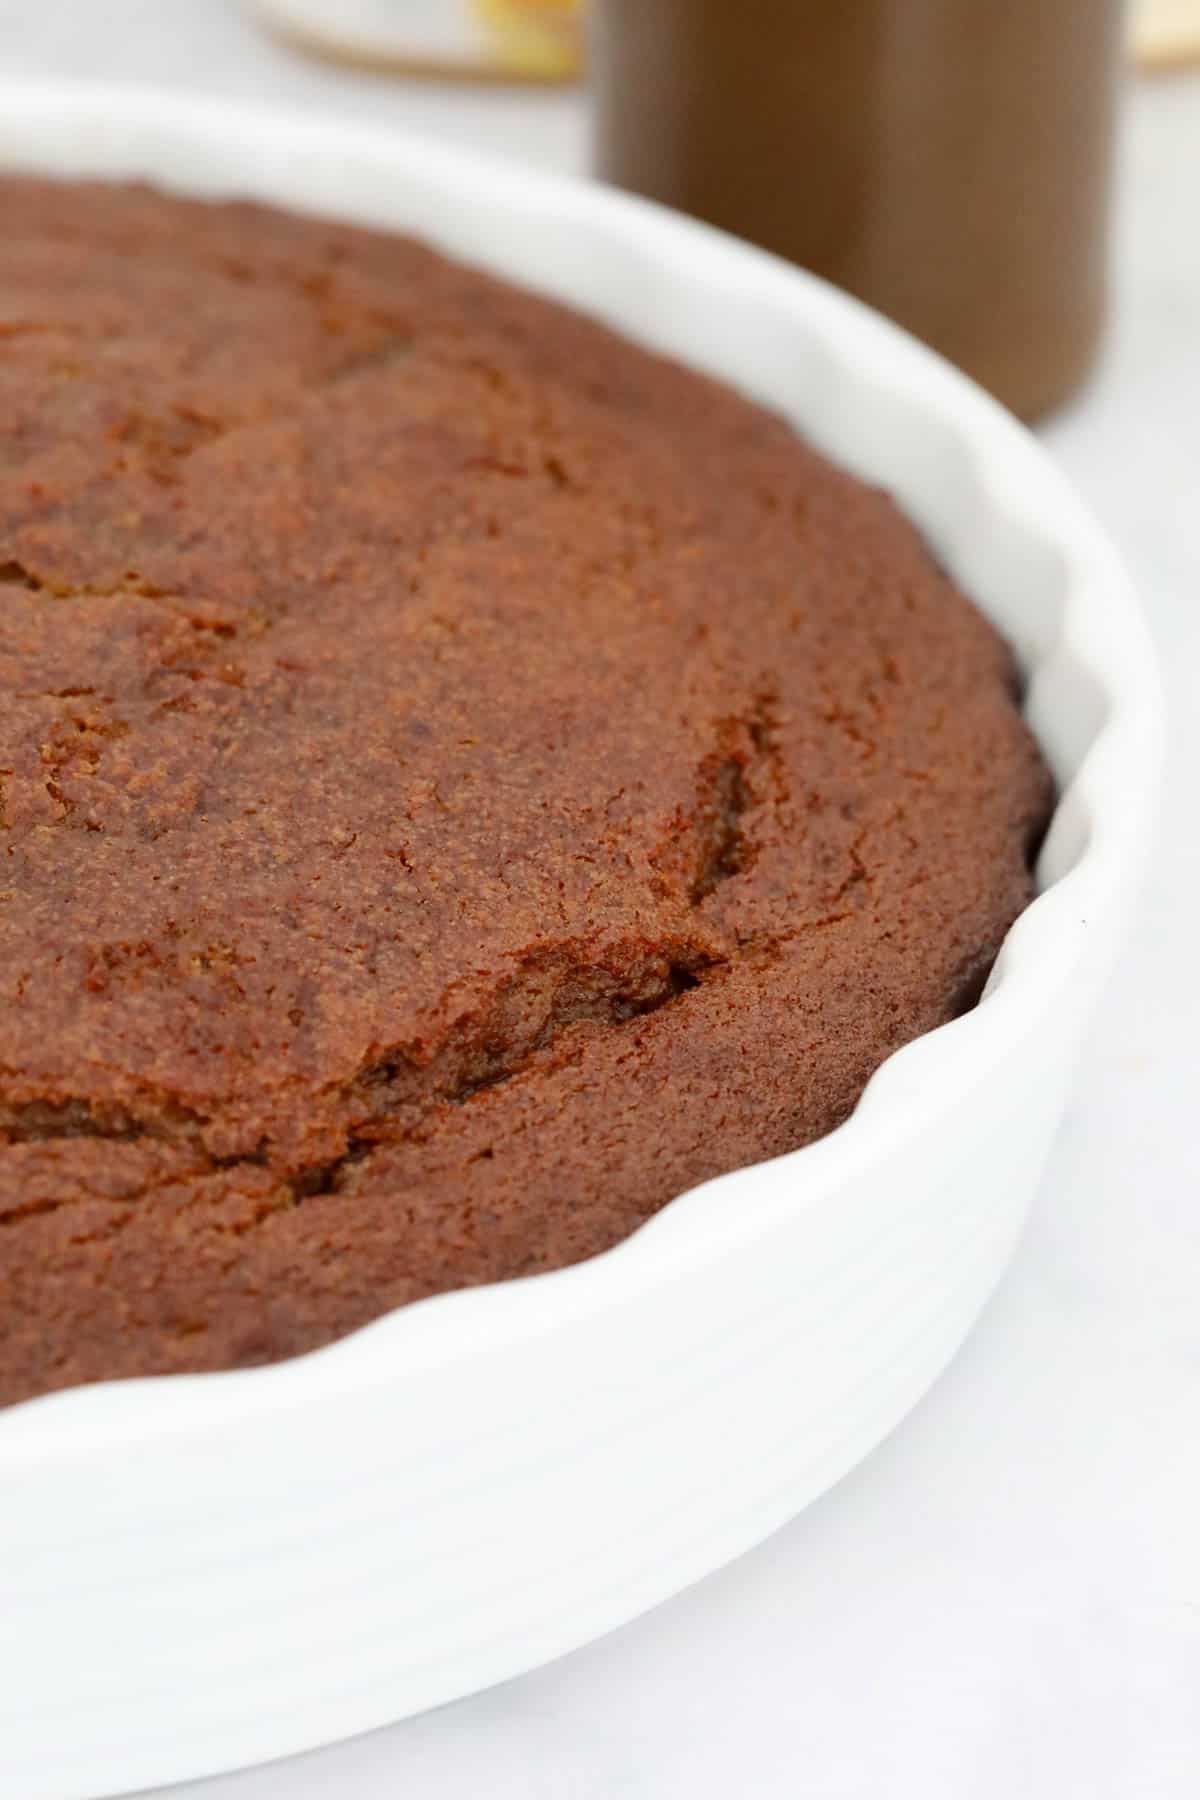 Baked date pudding in a round white baking dish.